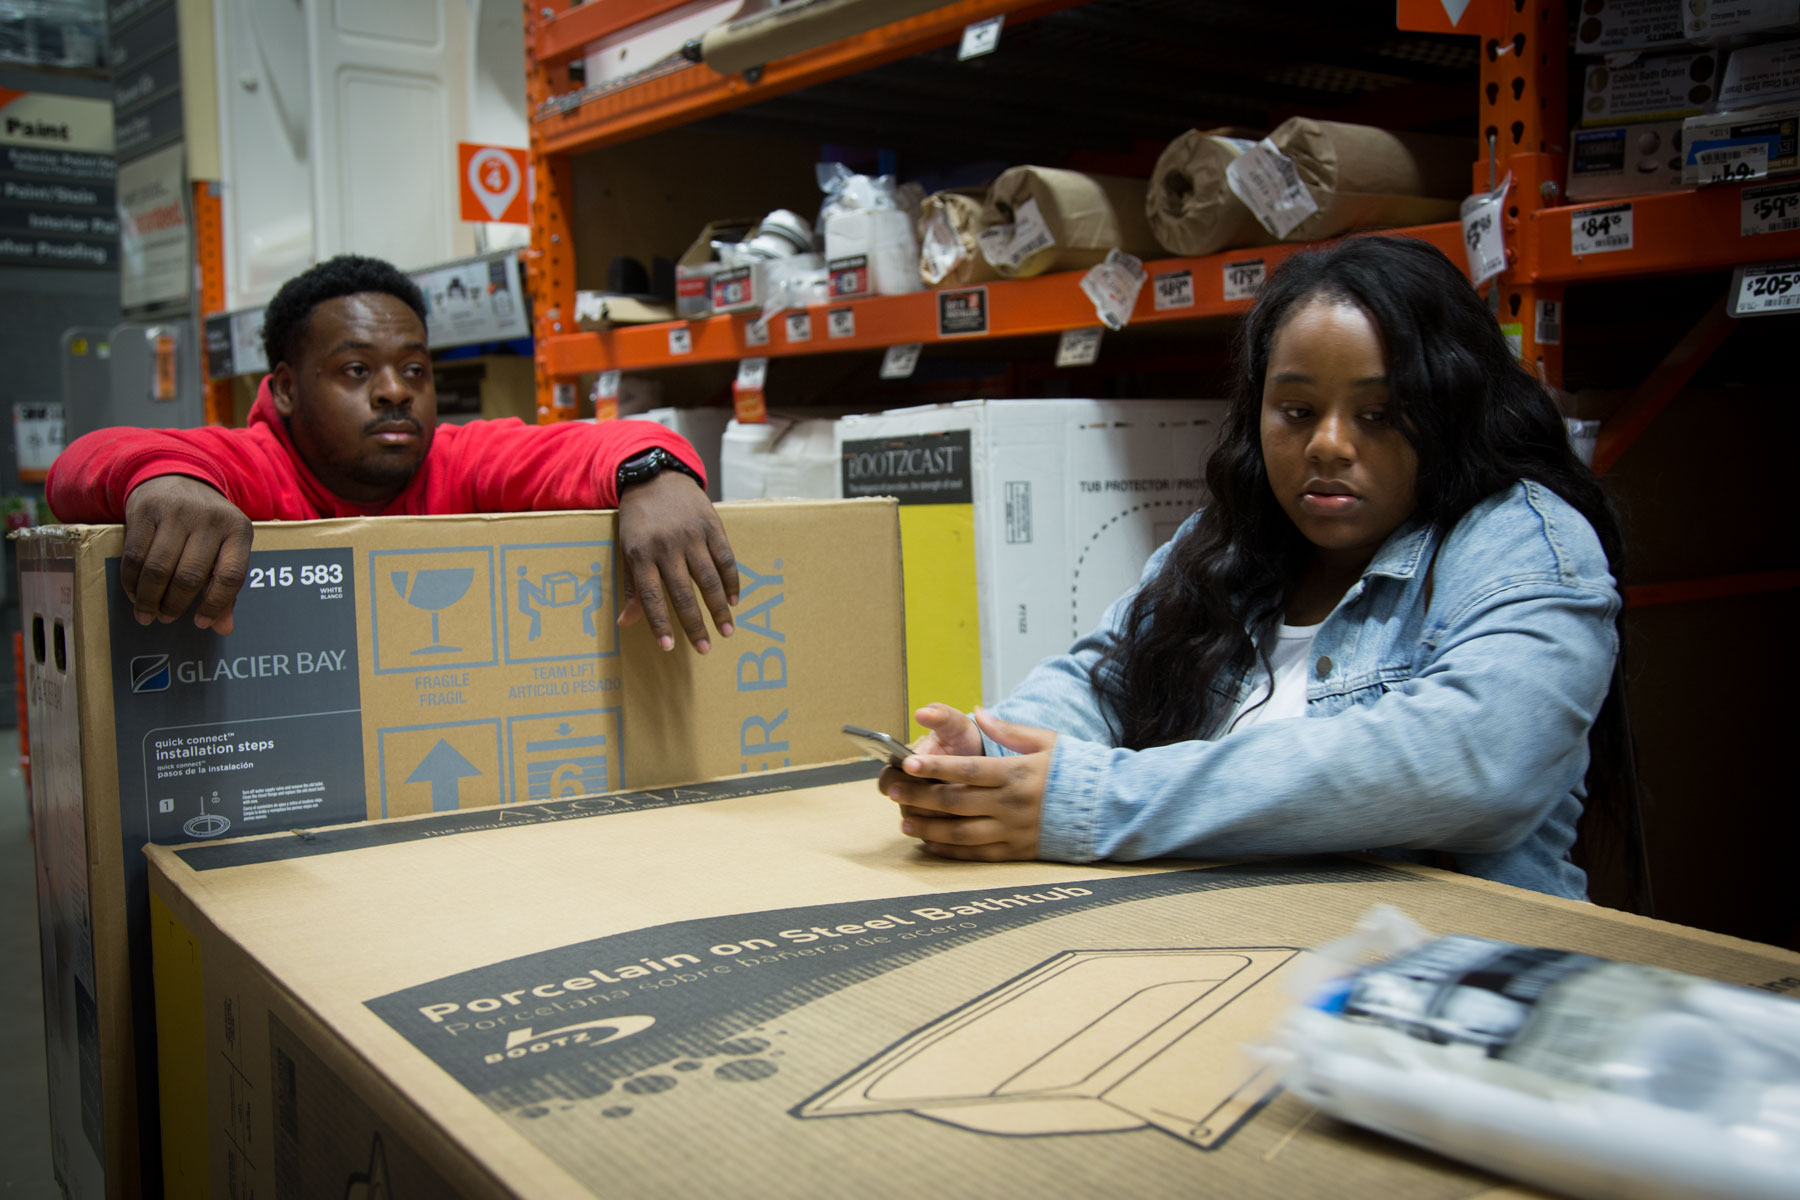 Dominic and Brittany are seen a hardware store buying items they need to repair their home